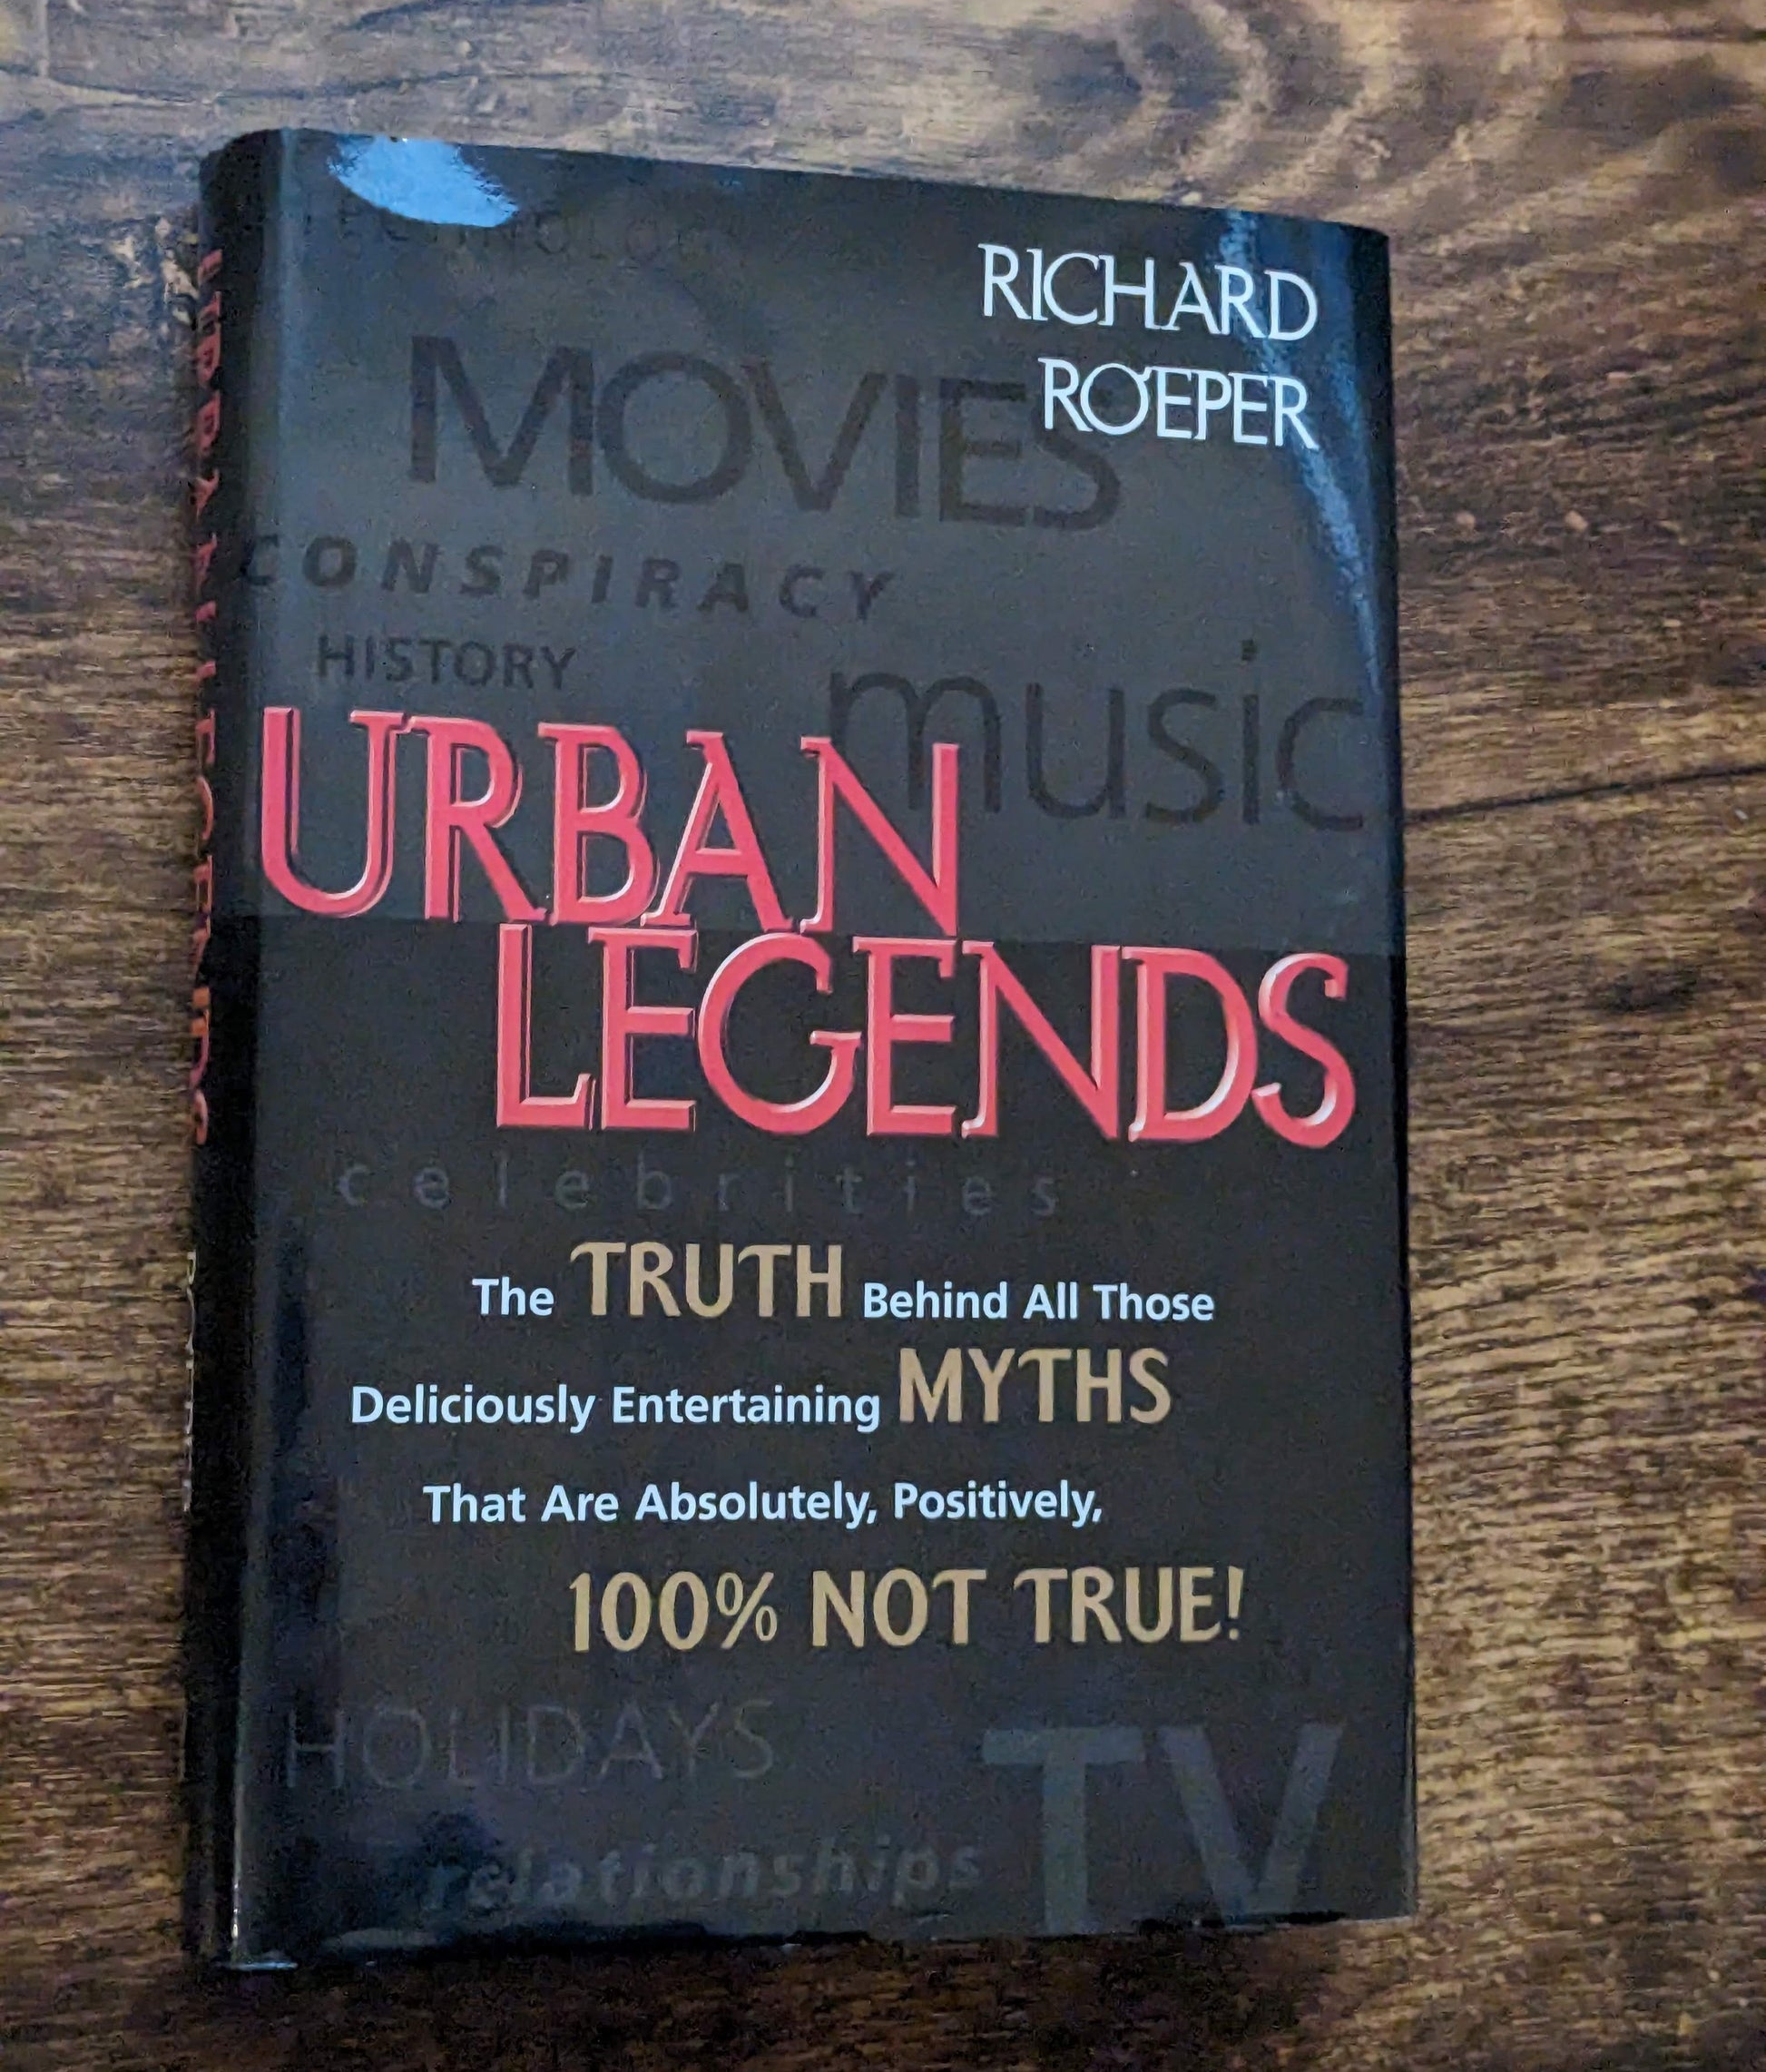 Urban Legends: The Truth Behind All Those Deliciously Entertaining Myths That Are Absolutely, Positively, 100% Not True! by Richard Roeper - Asylum Books